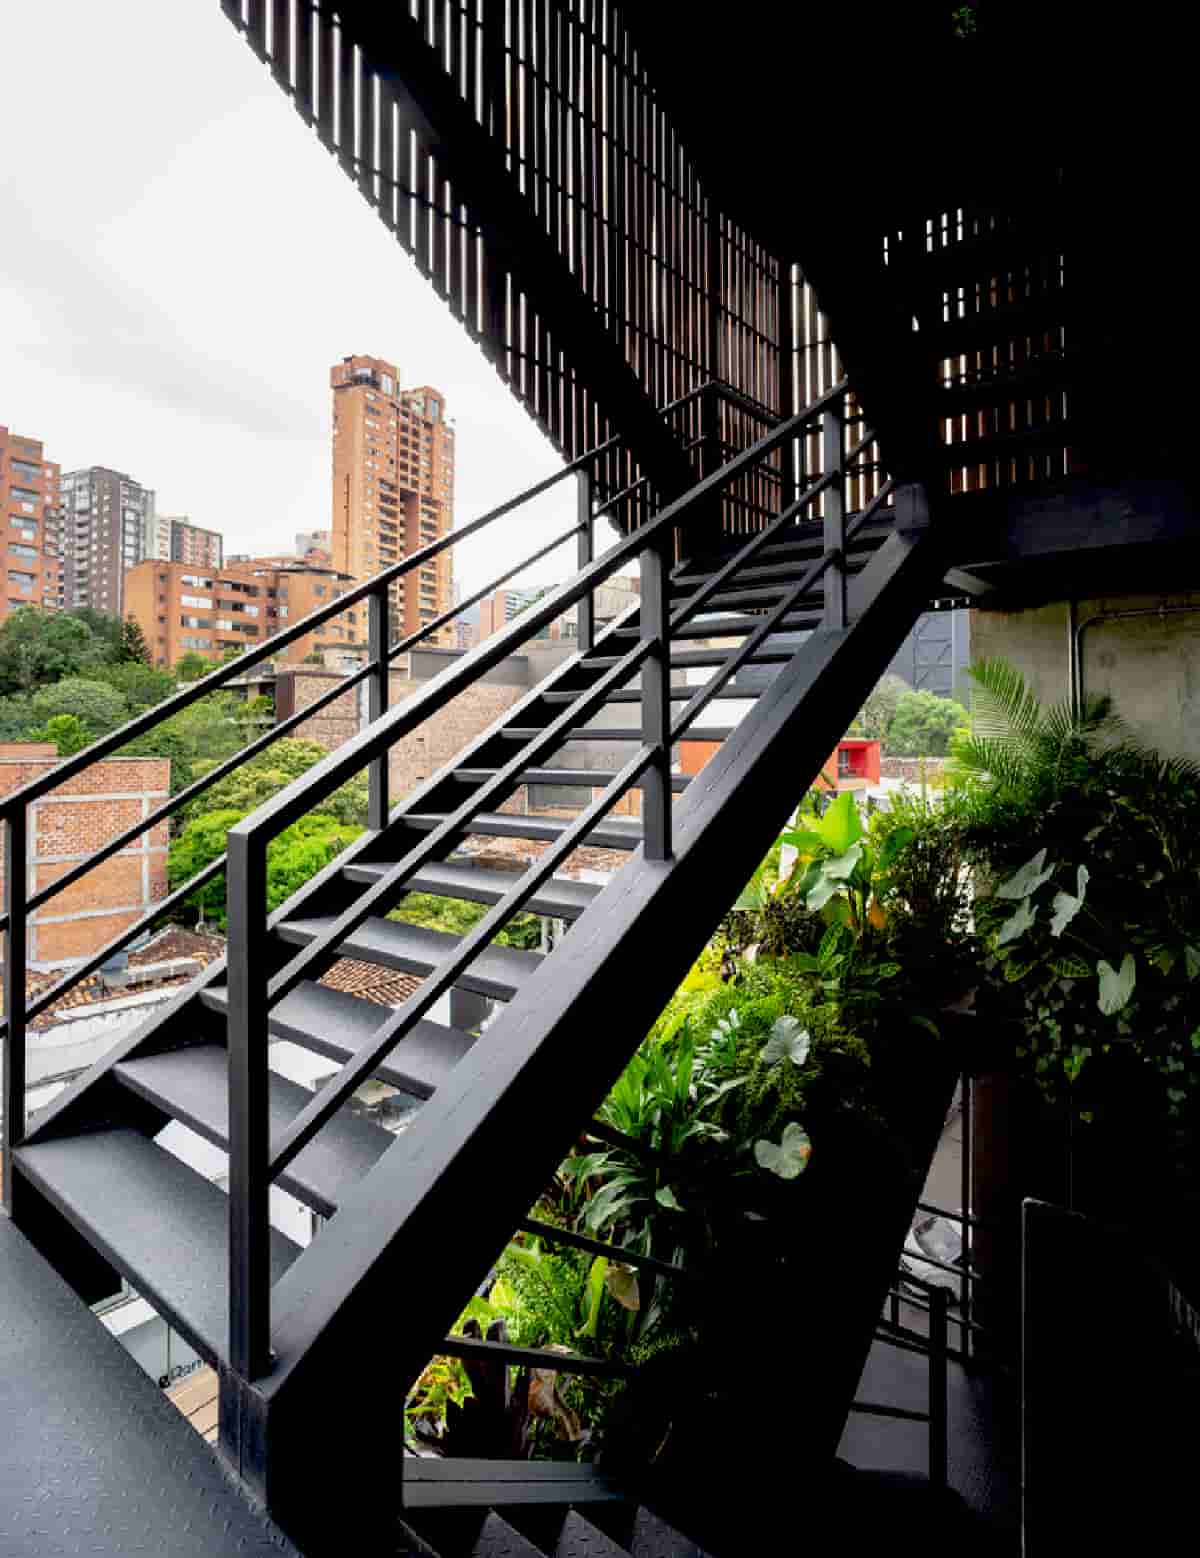 Urban Hotel Was Built Designed To Withstand The High Touristic Demand In El Poblado In Medellin